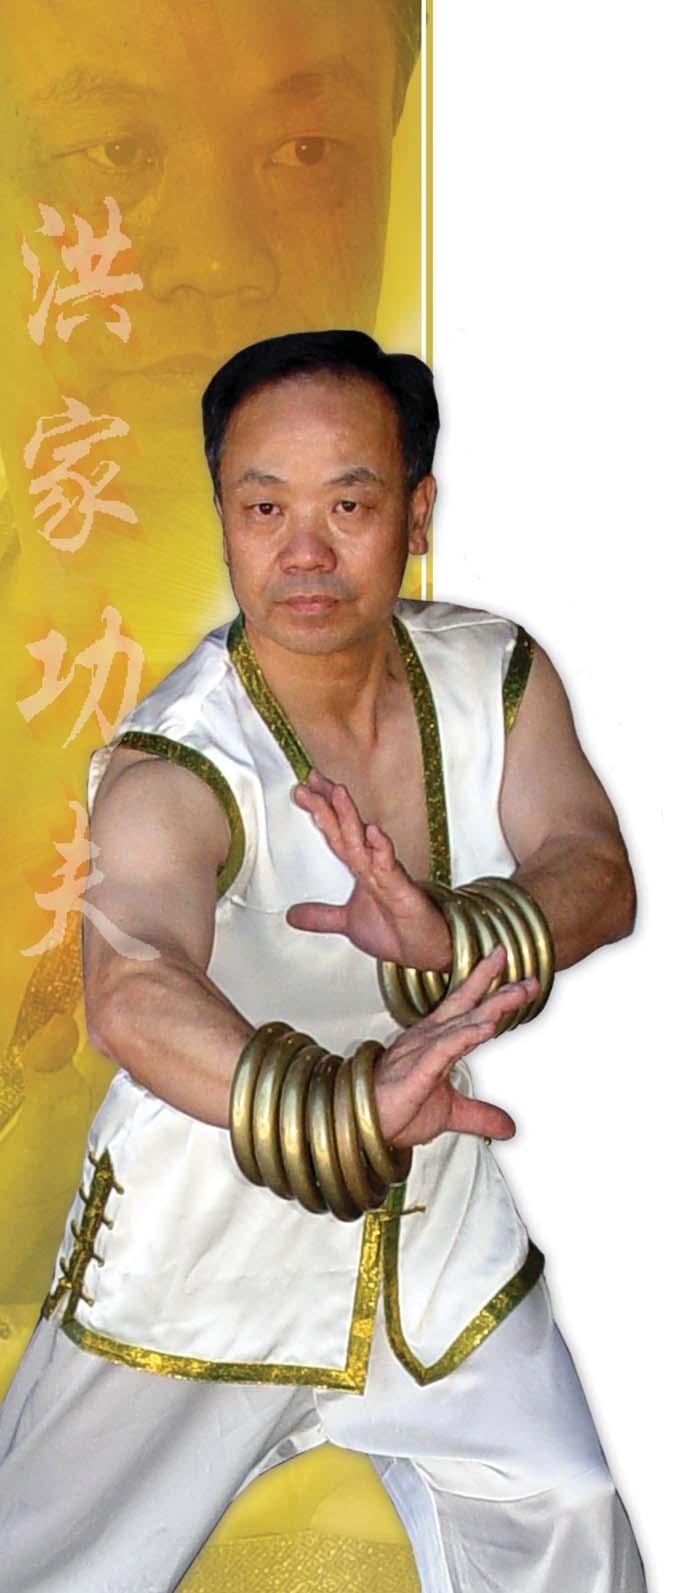 Hung Gar Instruc tional Videos Four Gates Hand Sparring* With traditional Kung Fu sparring sets, you and your partner can refine your applications without resorting to protective pads.